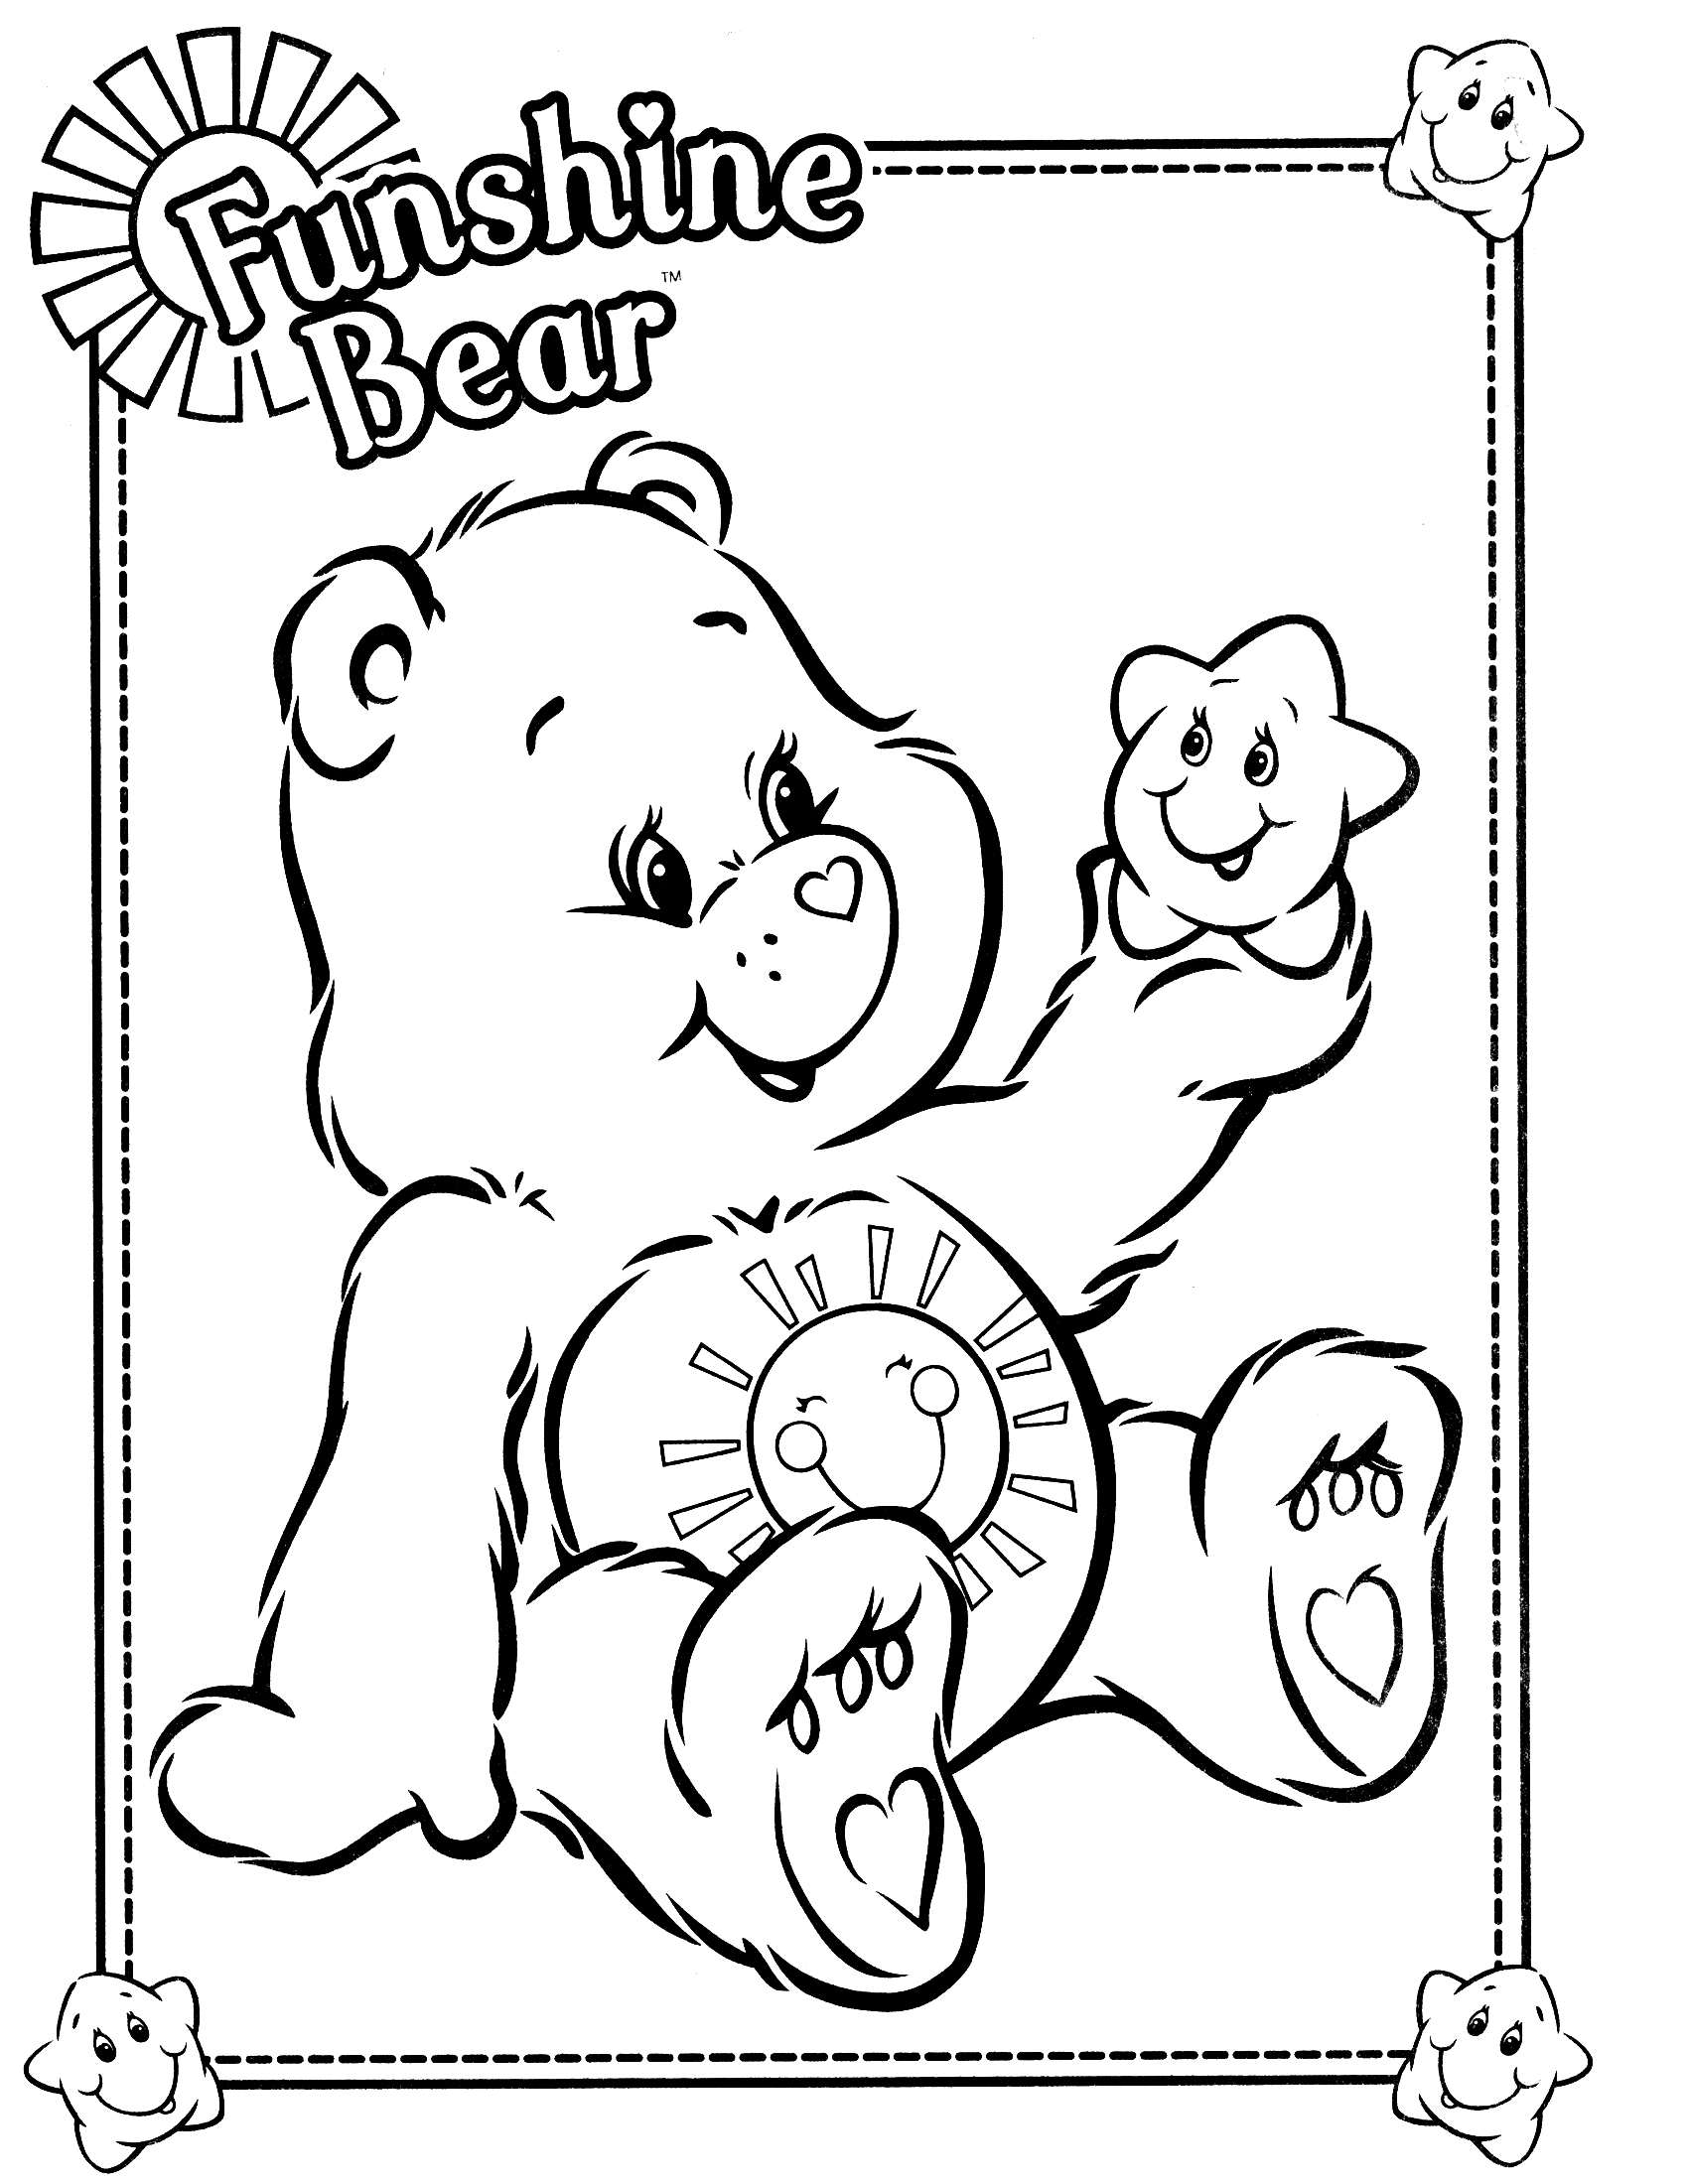 Care Bears 37 (Cartoons) Printable coloring pages